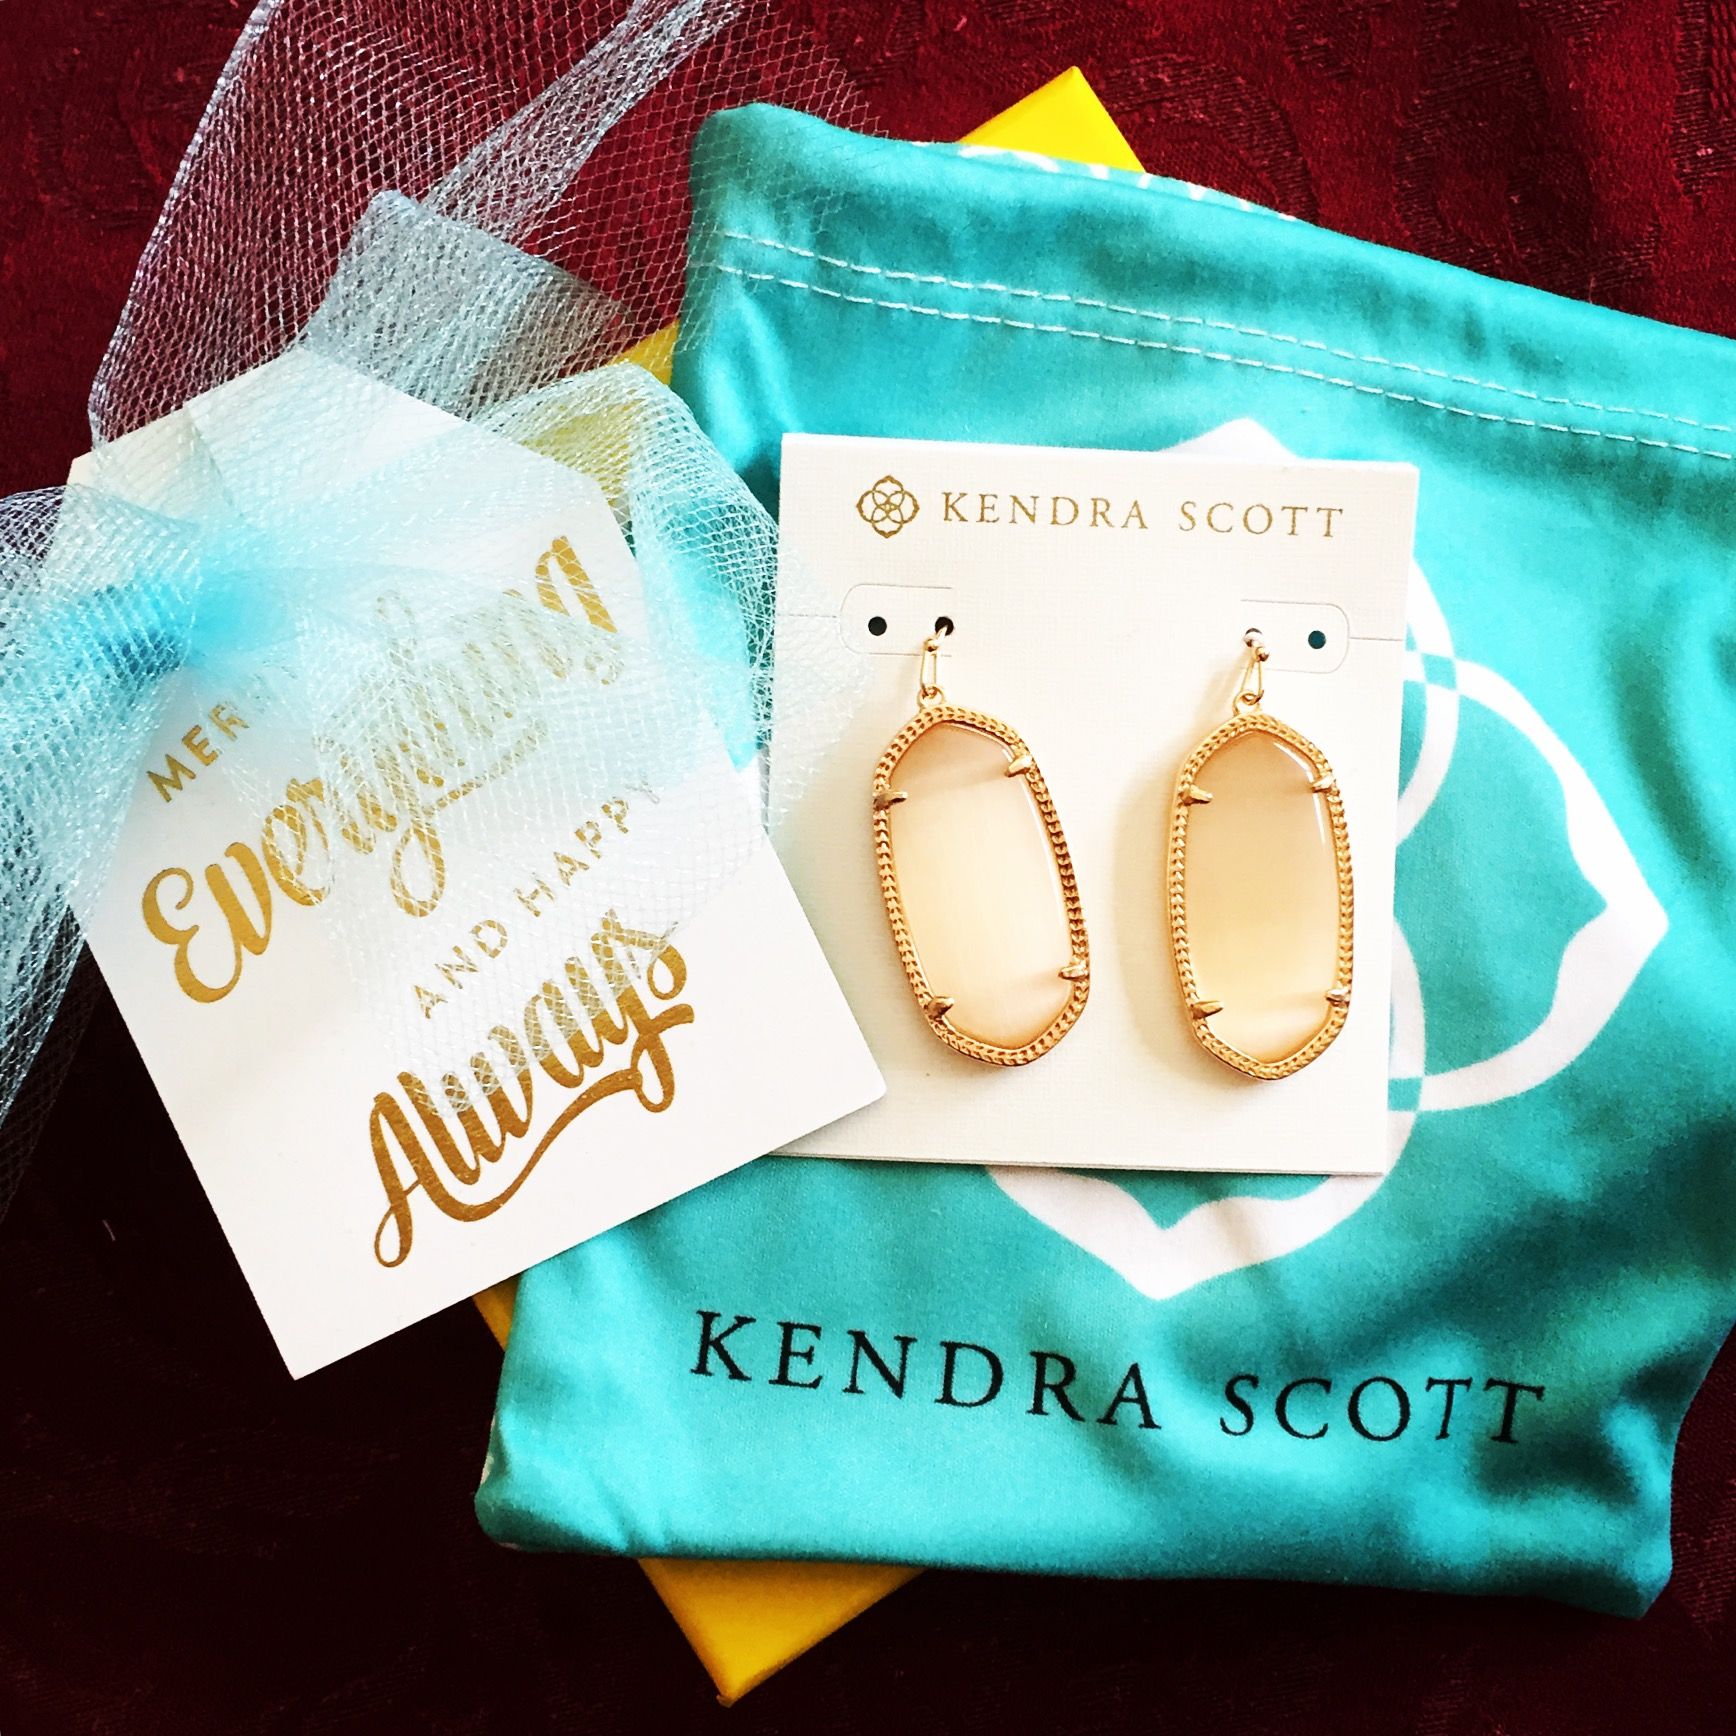 Kendra Scott | Memphis Holiday Gift Guide 2016 | Memphis Invisalign and Braces Dr. Kyle Fagala